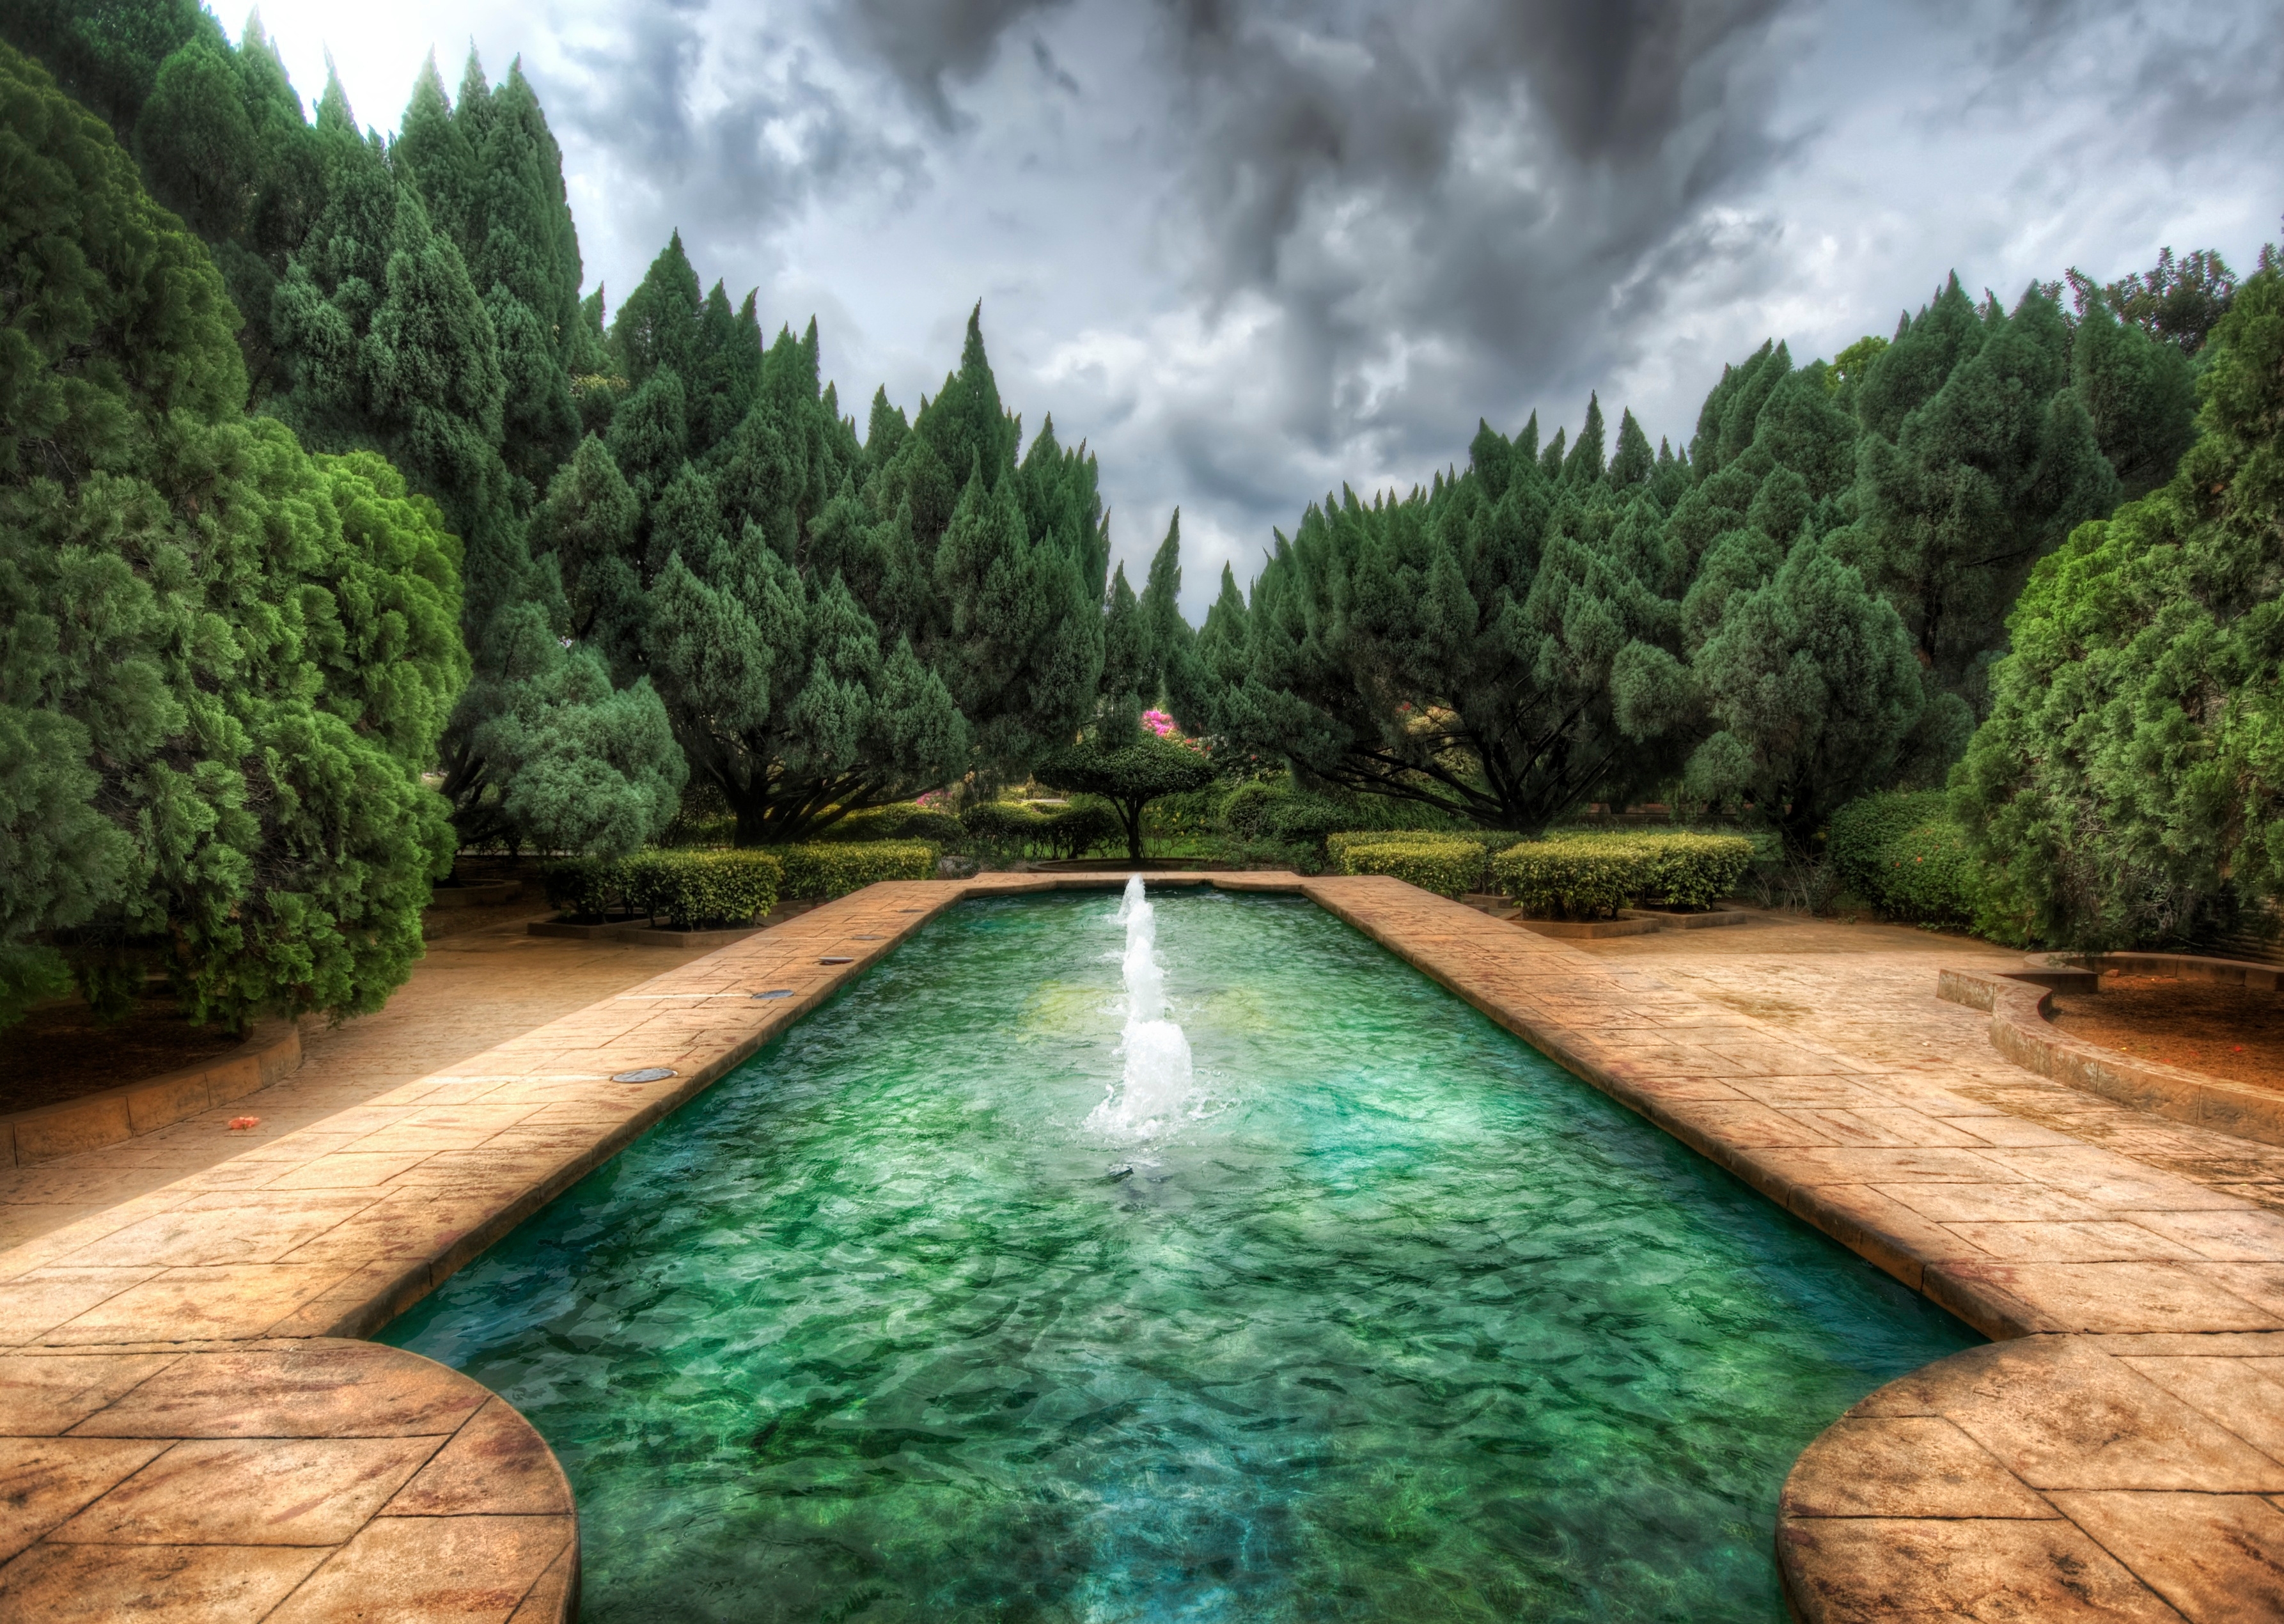 color, overcast, pool, forest, mainly cloudy, paints, fountain, nature, colors